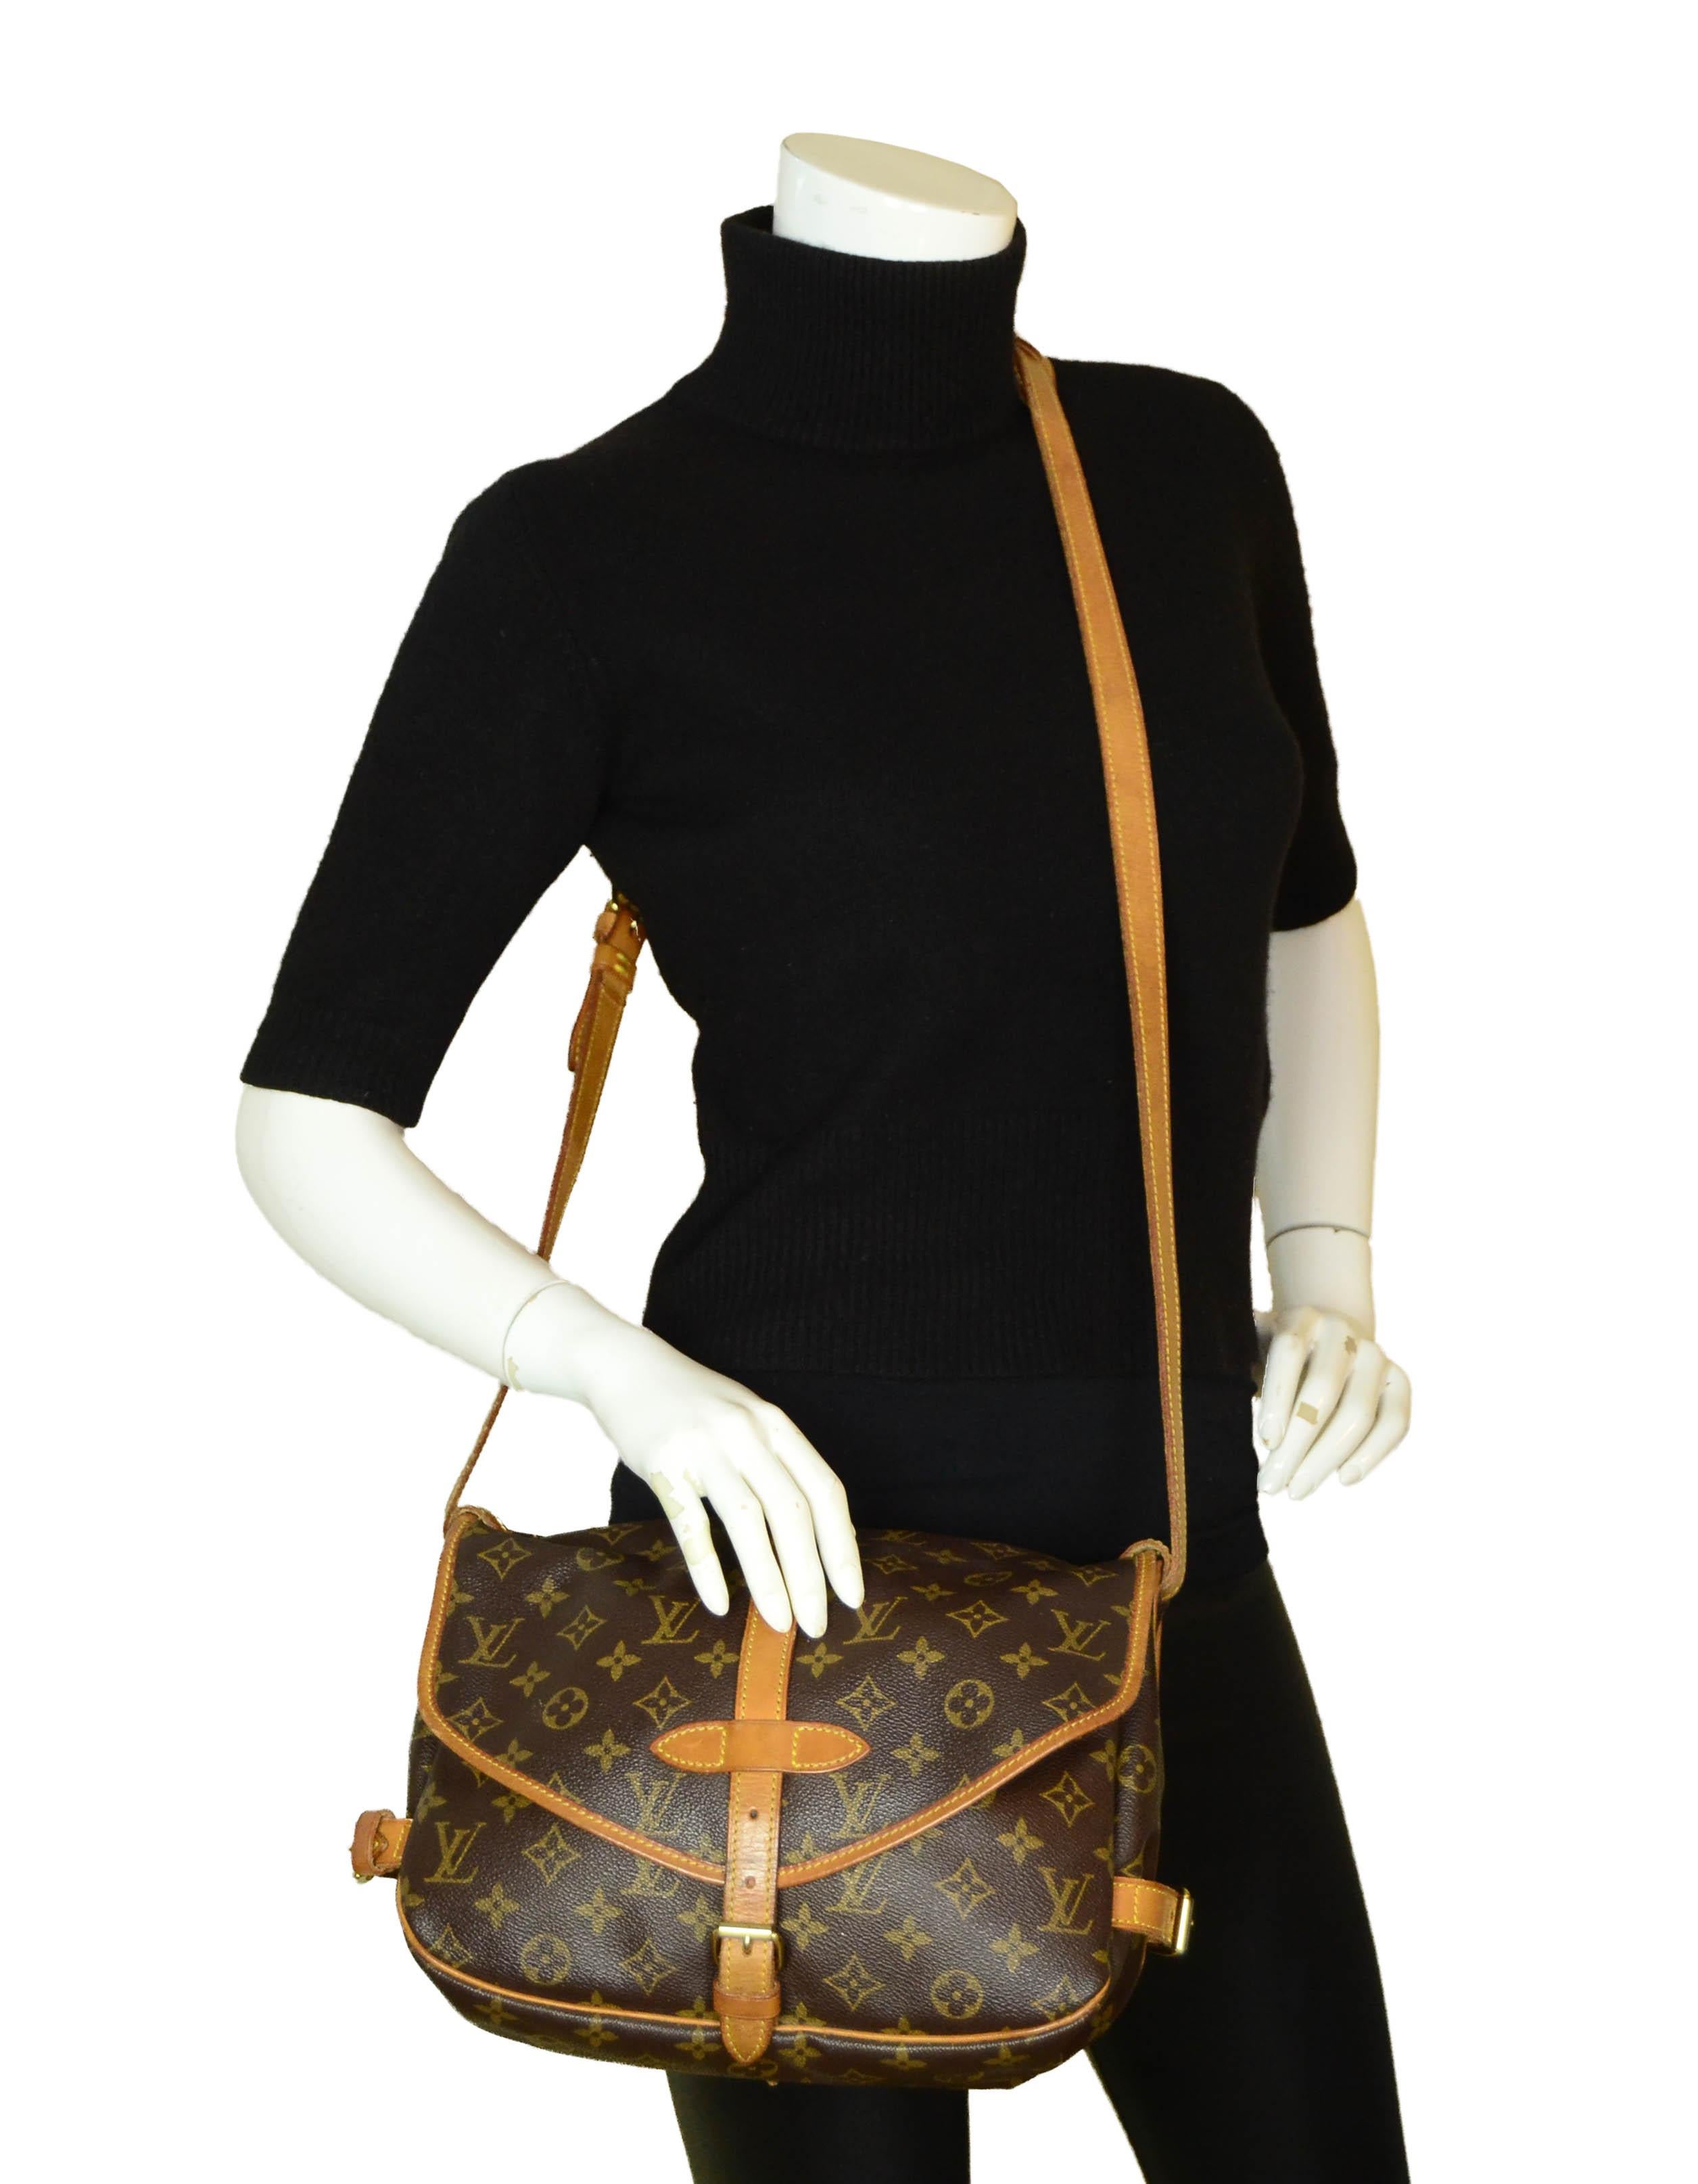 Louis Vuitton Monogram Saumur 30 Double Saddle Bag

Made In:France
Year of Production: 1993
Color: Brown monogram
Hardware: Goldtone
Materials: Coated canvas & vachetta leather
Lining: Canvas
Closure/Opening: Flap w/ strap & buckle
Interior Pockets: